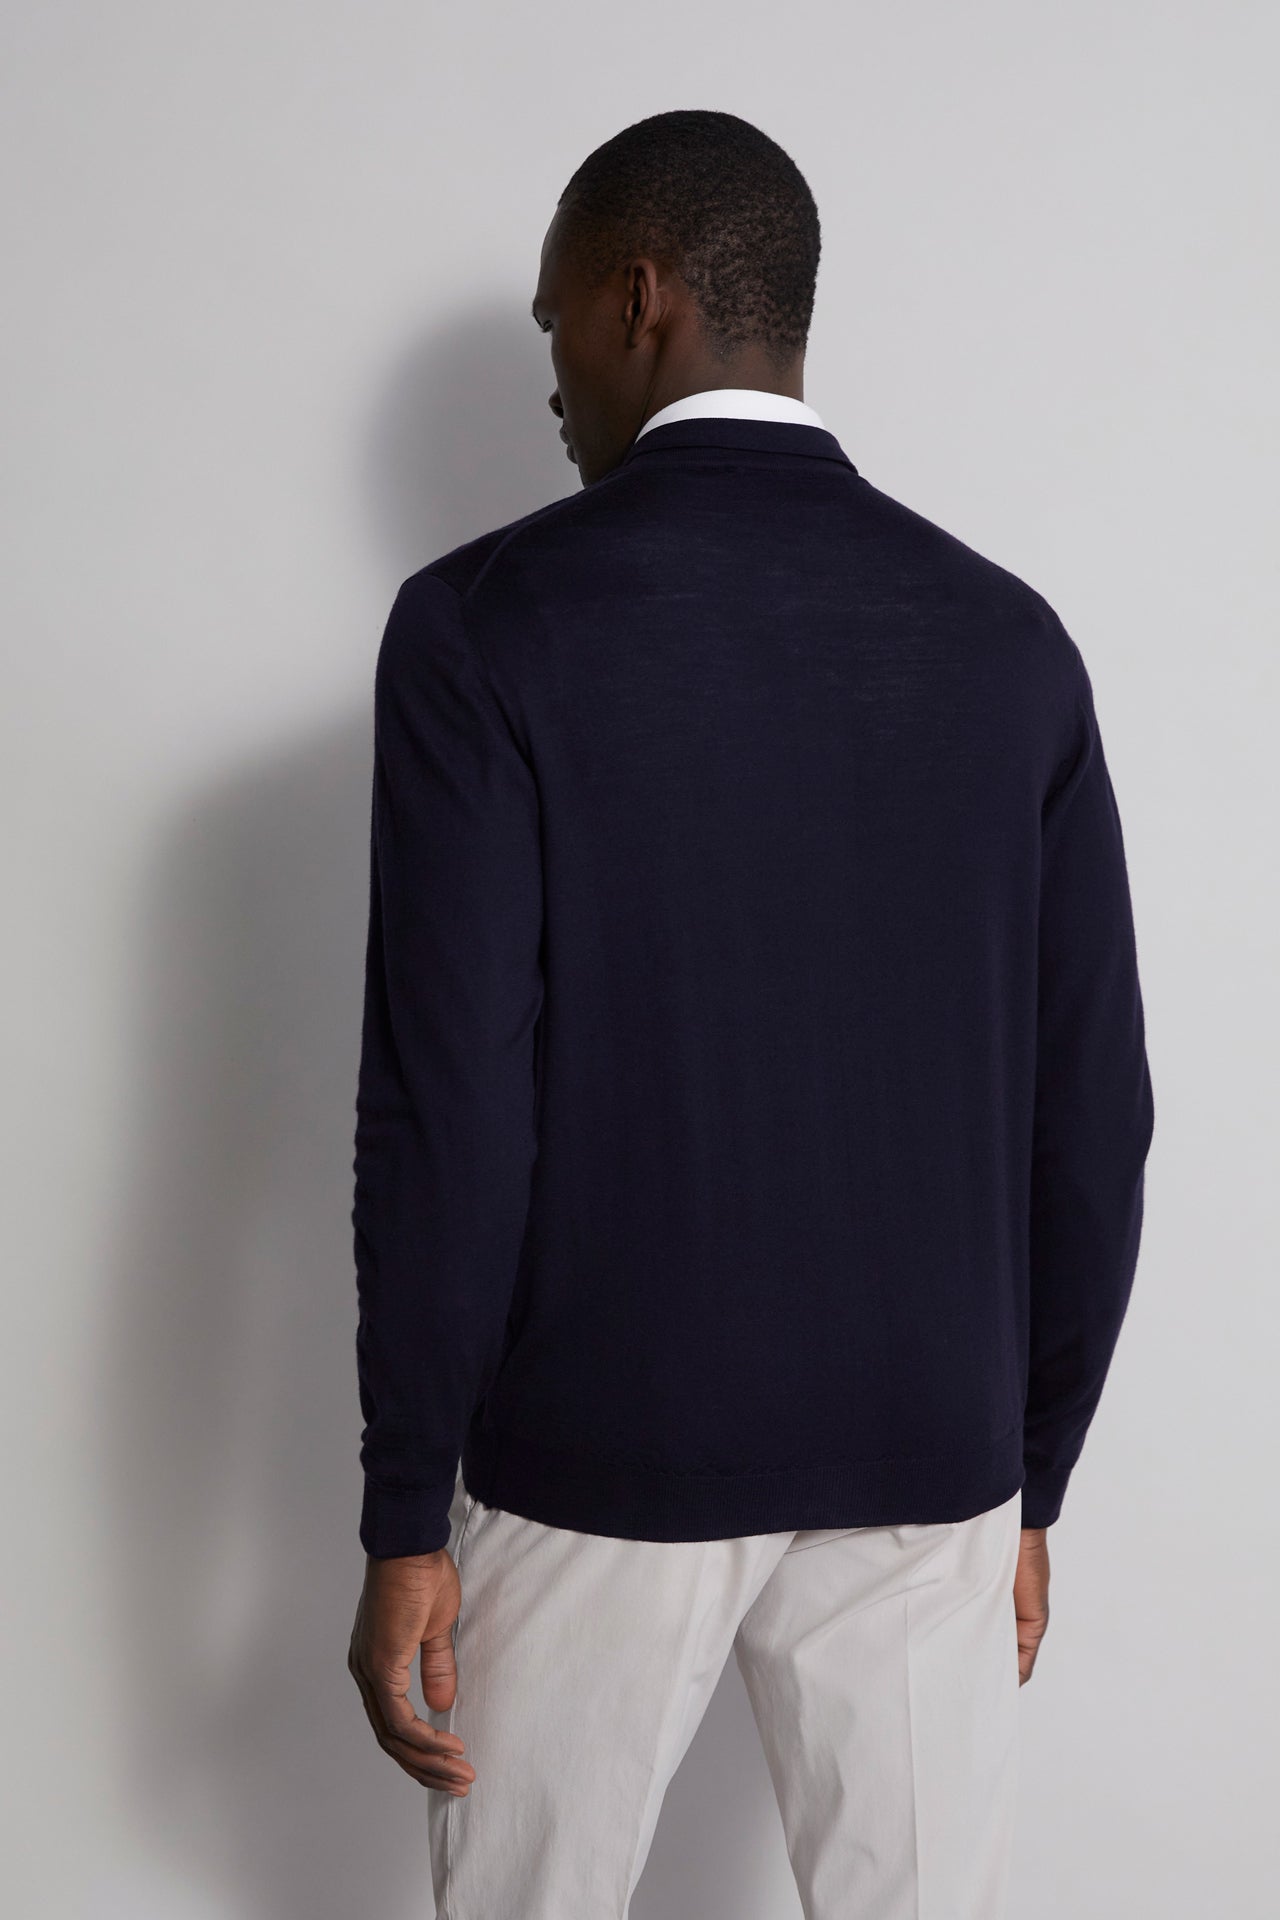 Favonio Open full-zipped Wool 140 sweater in iconic colors